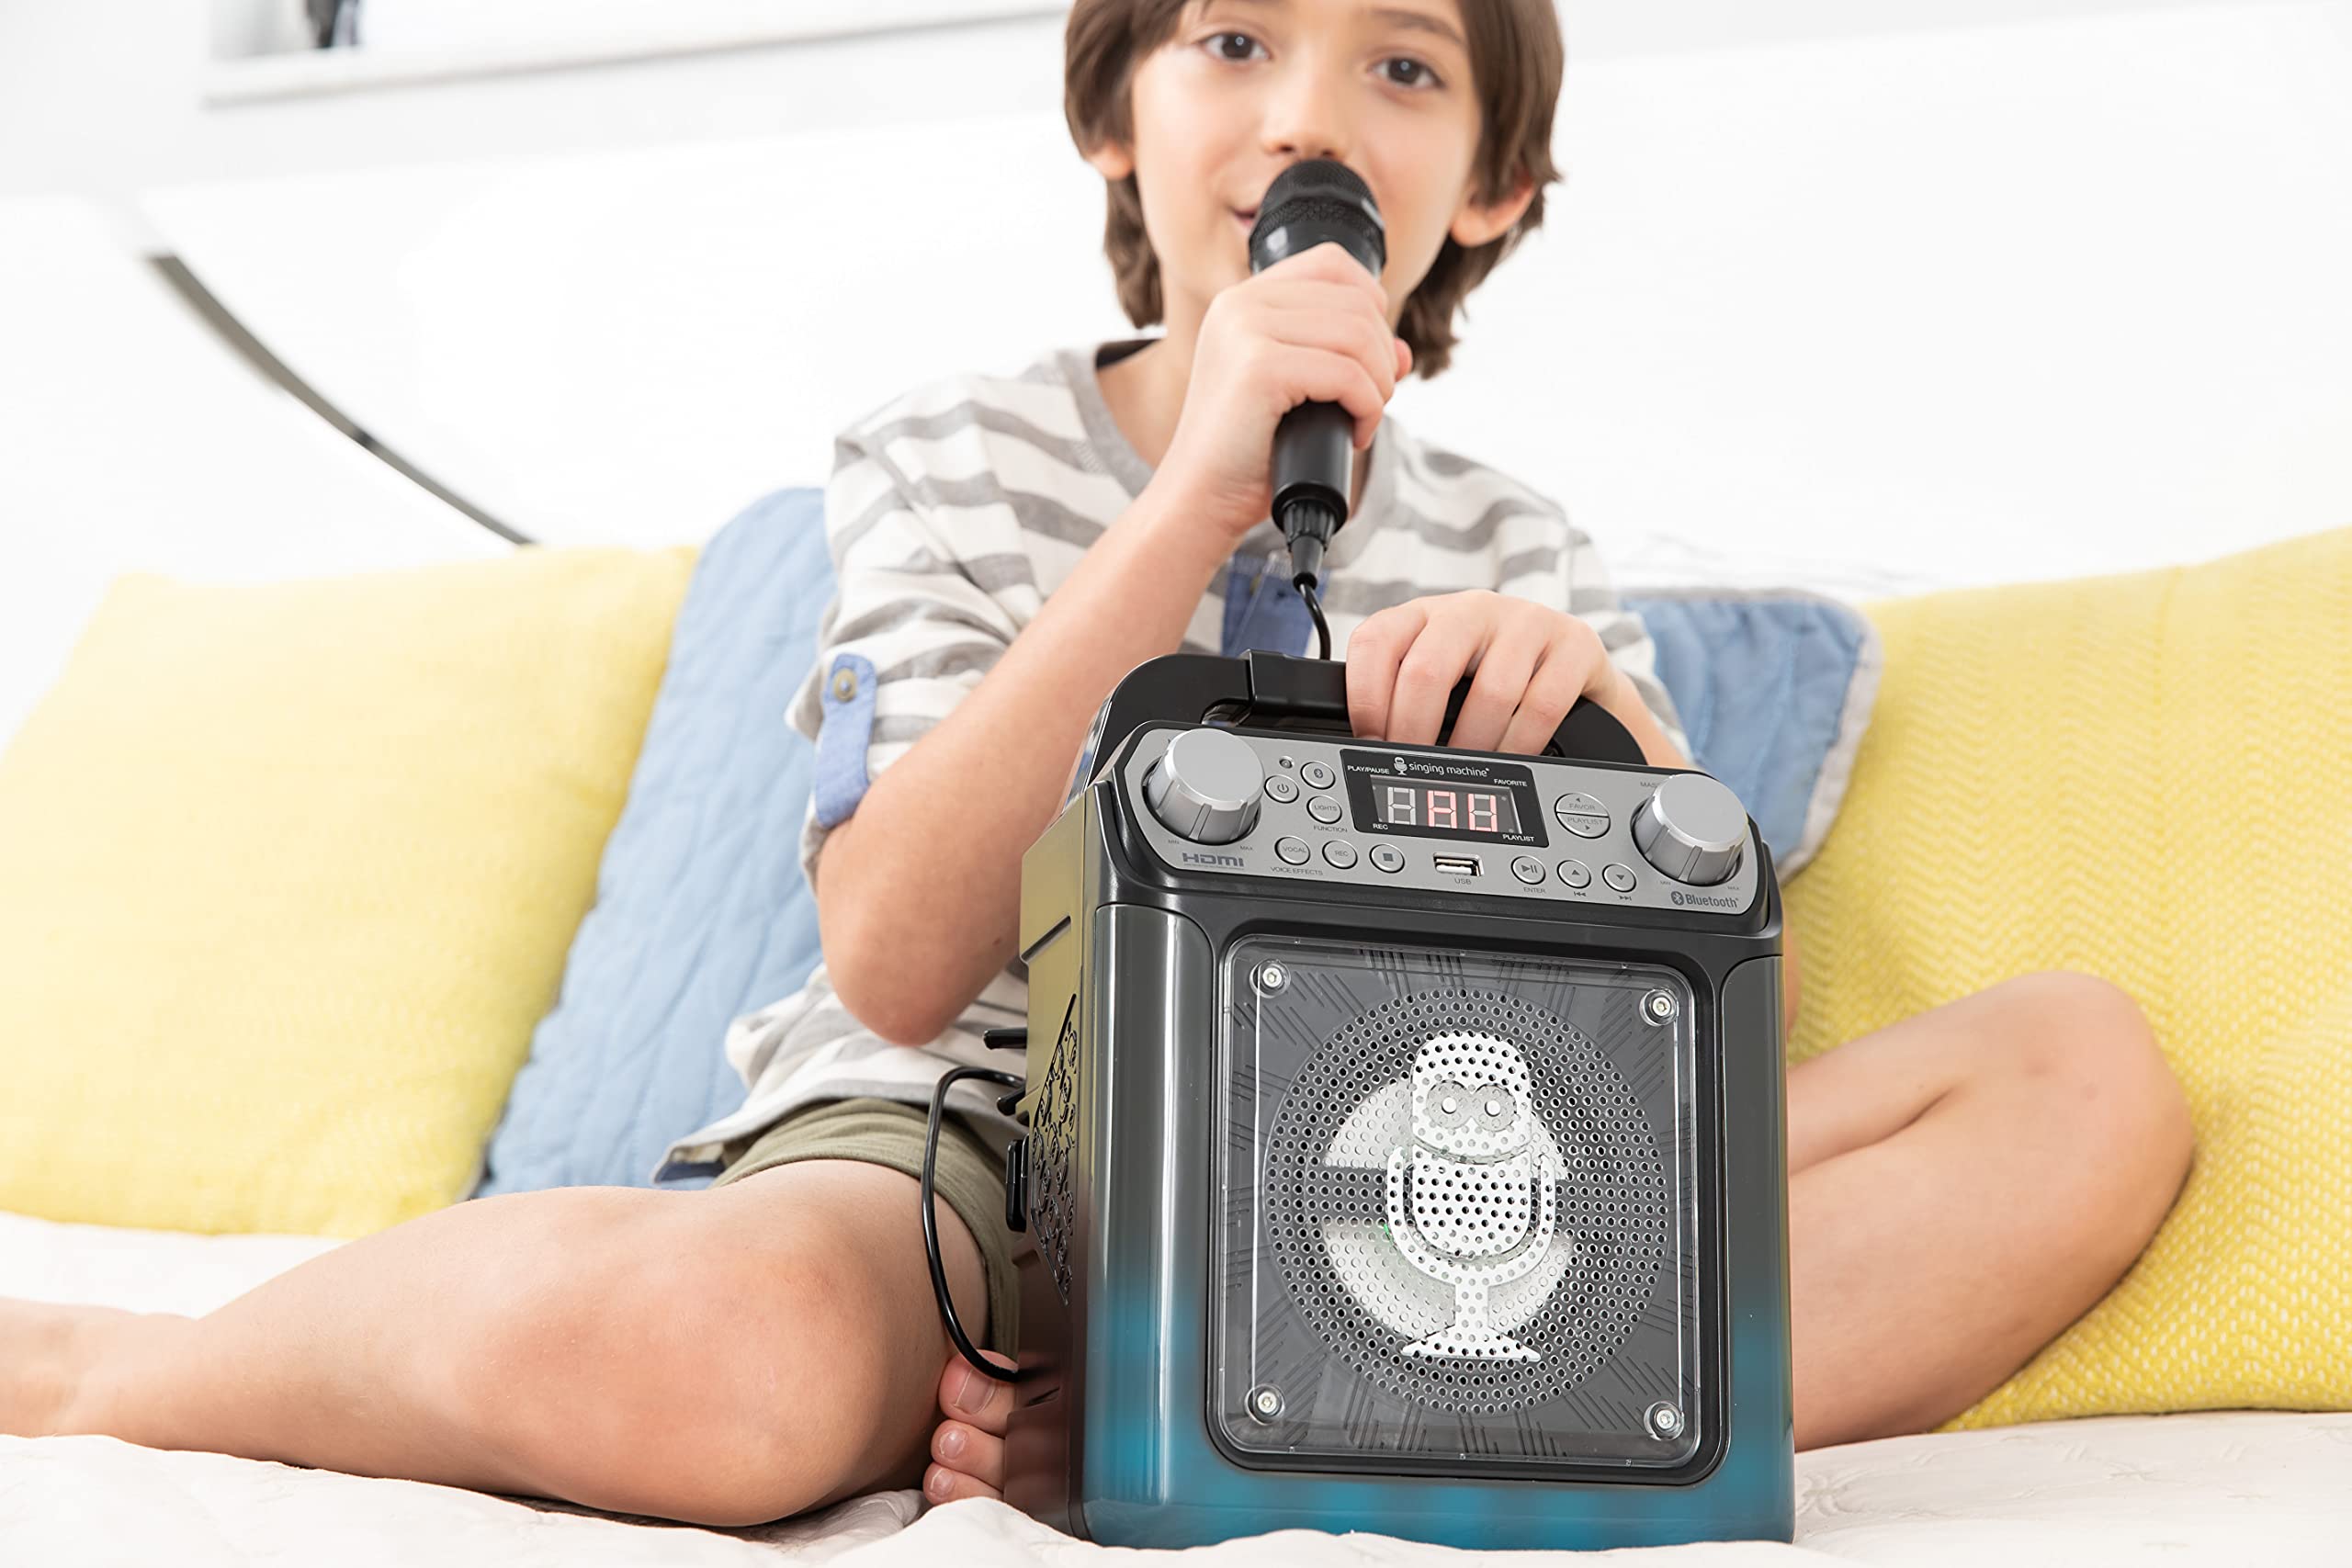 Singing Machine Portable Karaoke Machine for Adults & Kids with Wired Microphone, Groove Mini (Black) - Built-In Karaoke Speaker, Bluetooth with LED Lights - Karaoke System with Voice Changing Effects